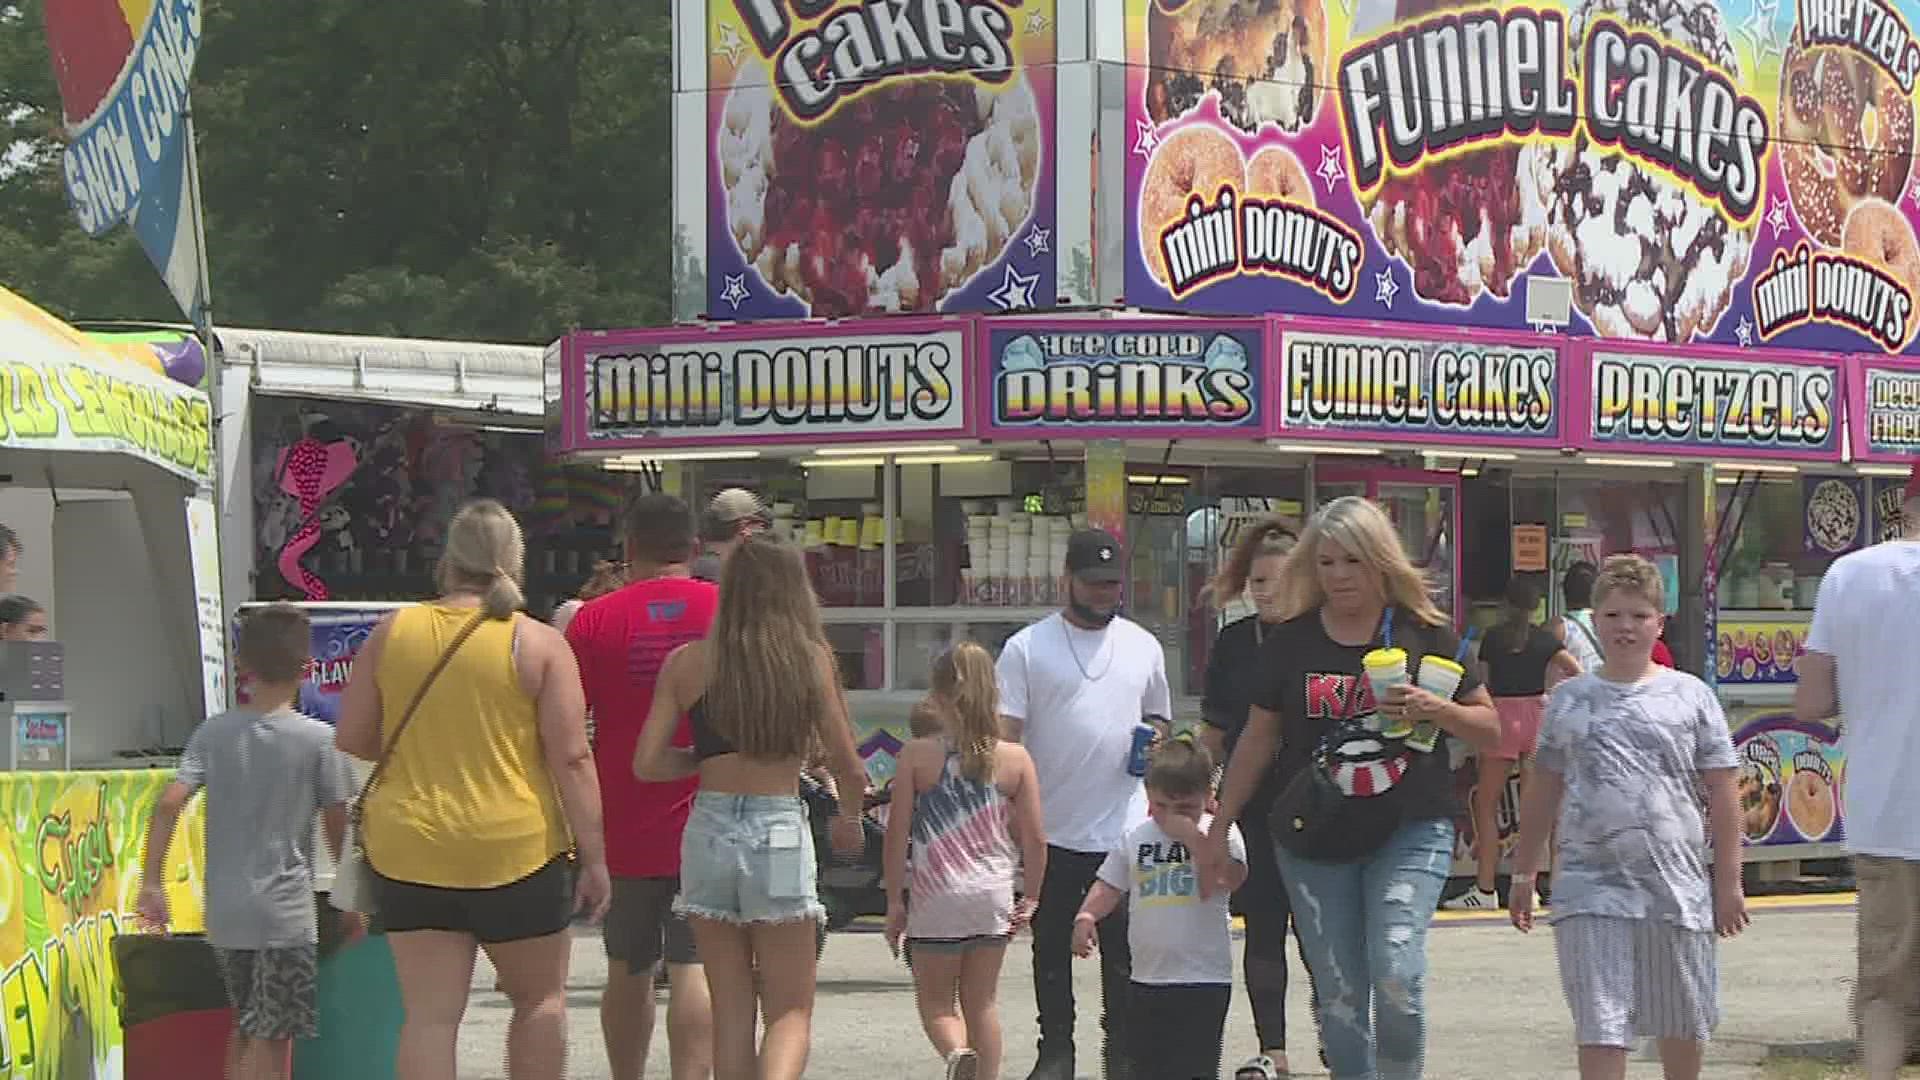 Daily admission will grant you access to most of the fairgrounds, excluding the Grandstand concerts. Only Fun Card holders are allowed admission after 9 p.m.